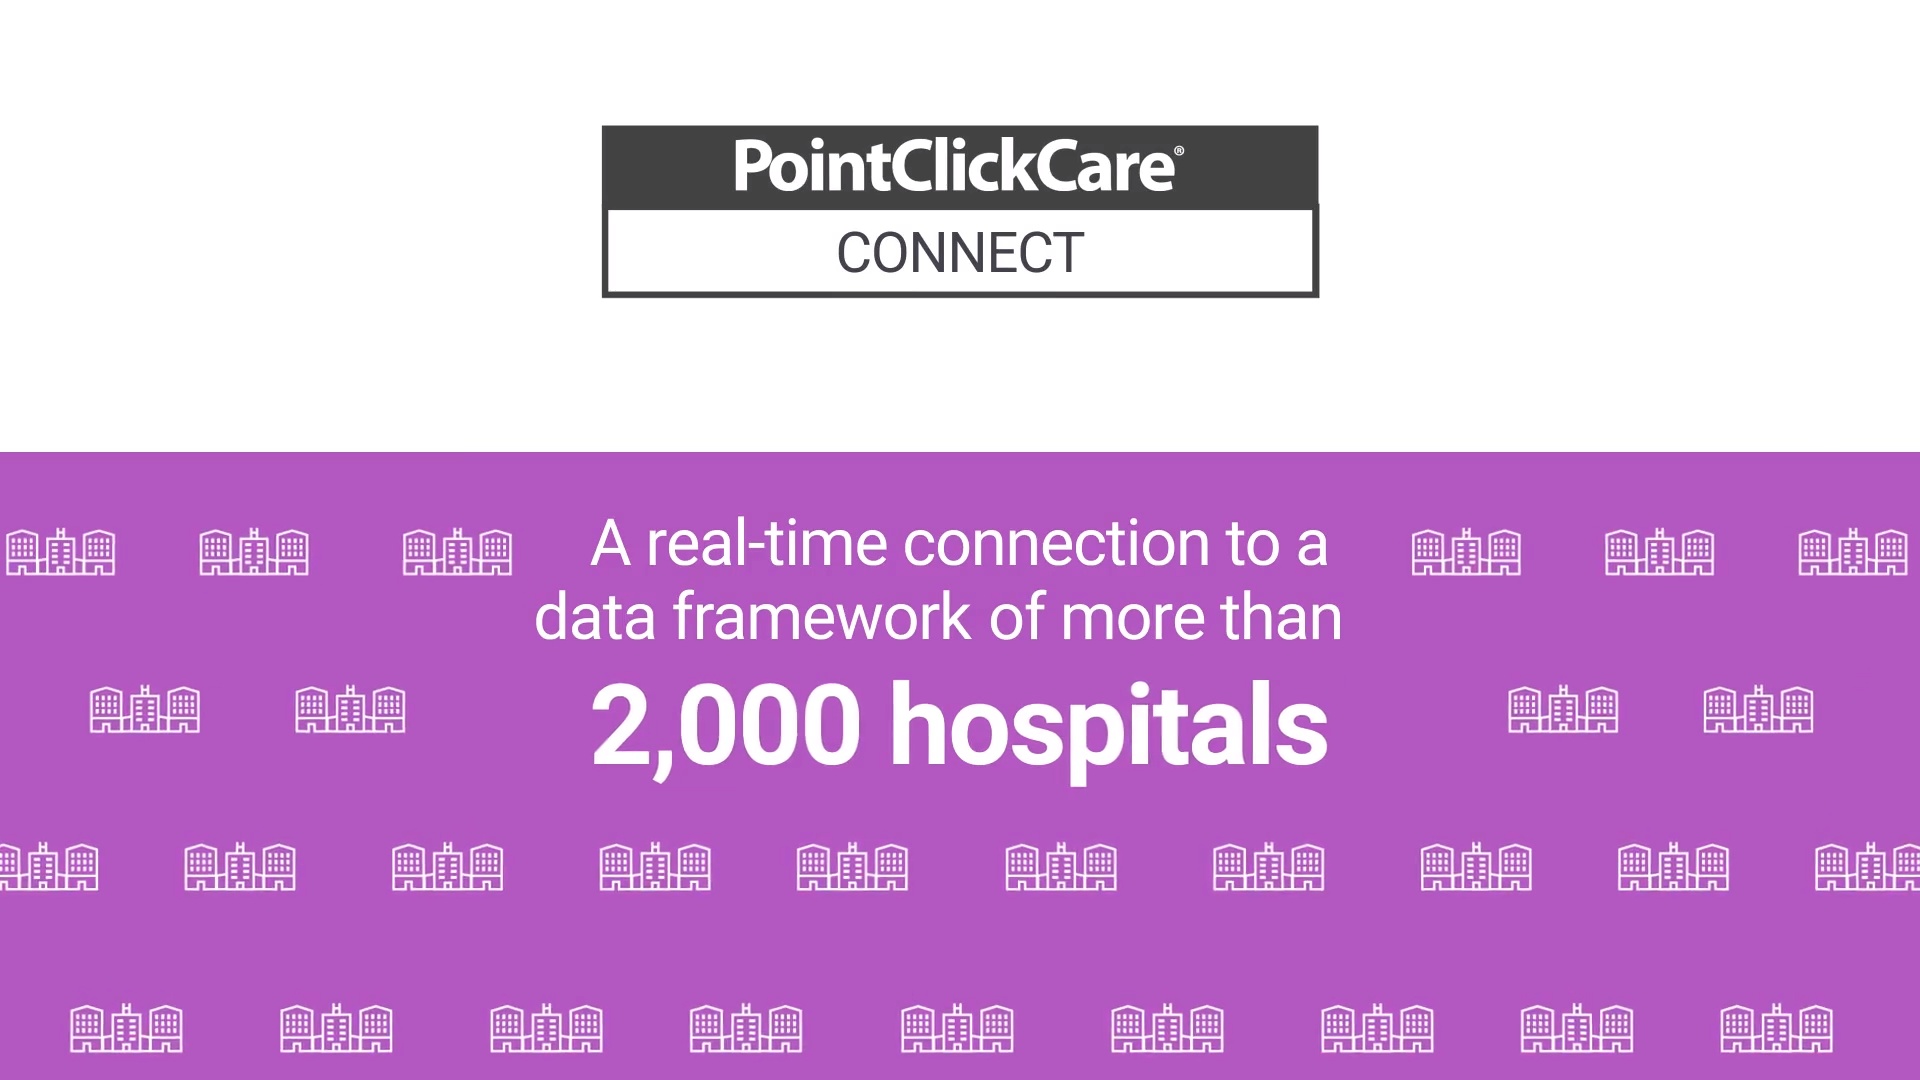 Introducing PointClickCare Connect for Carequality